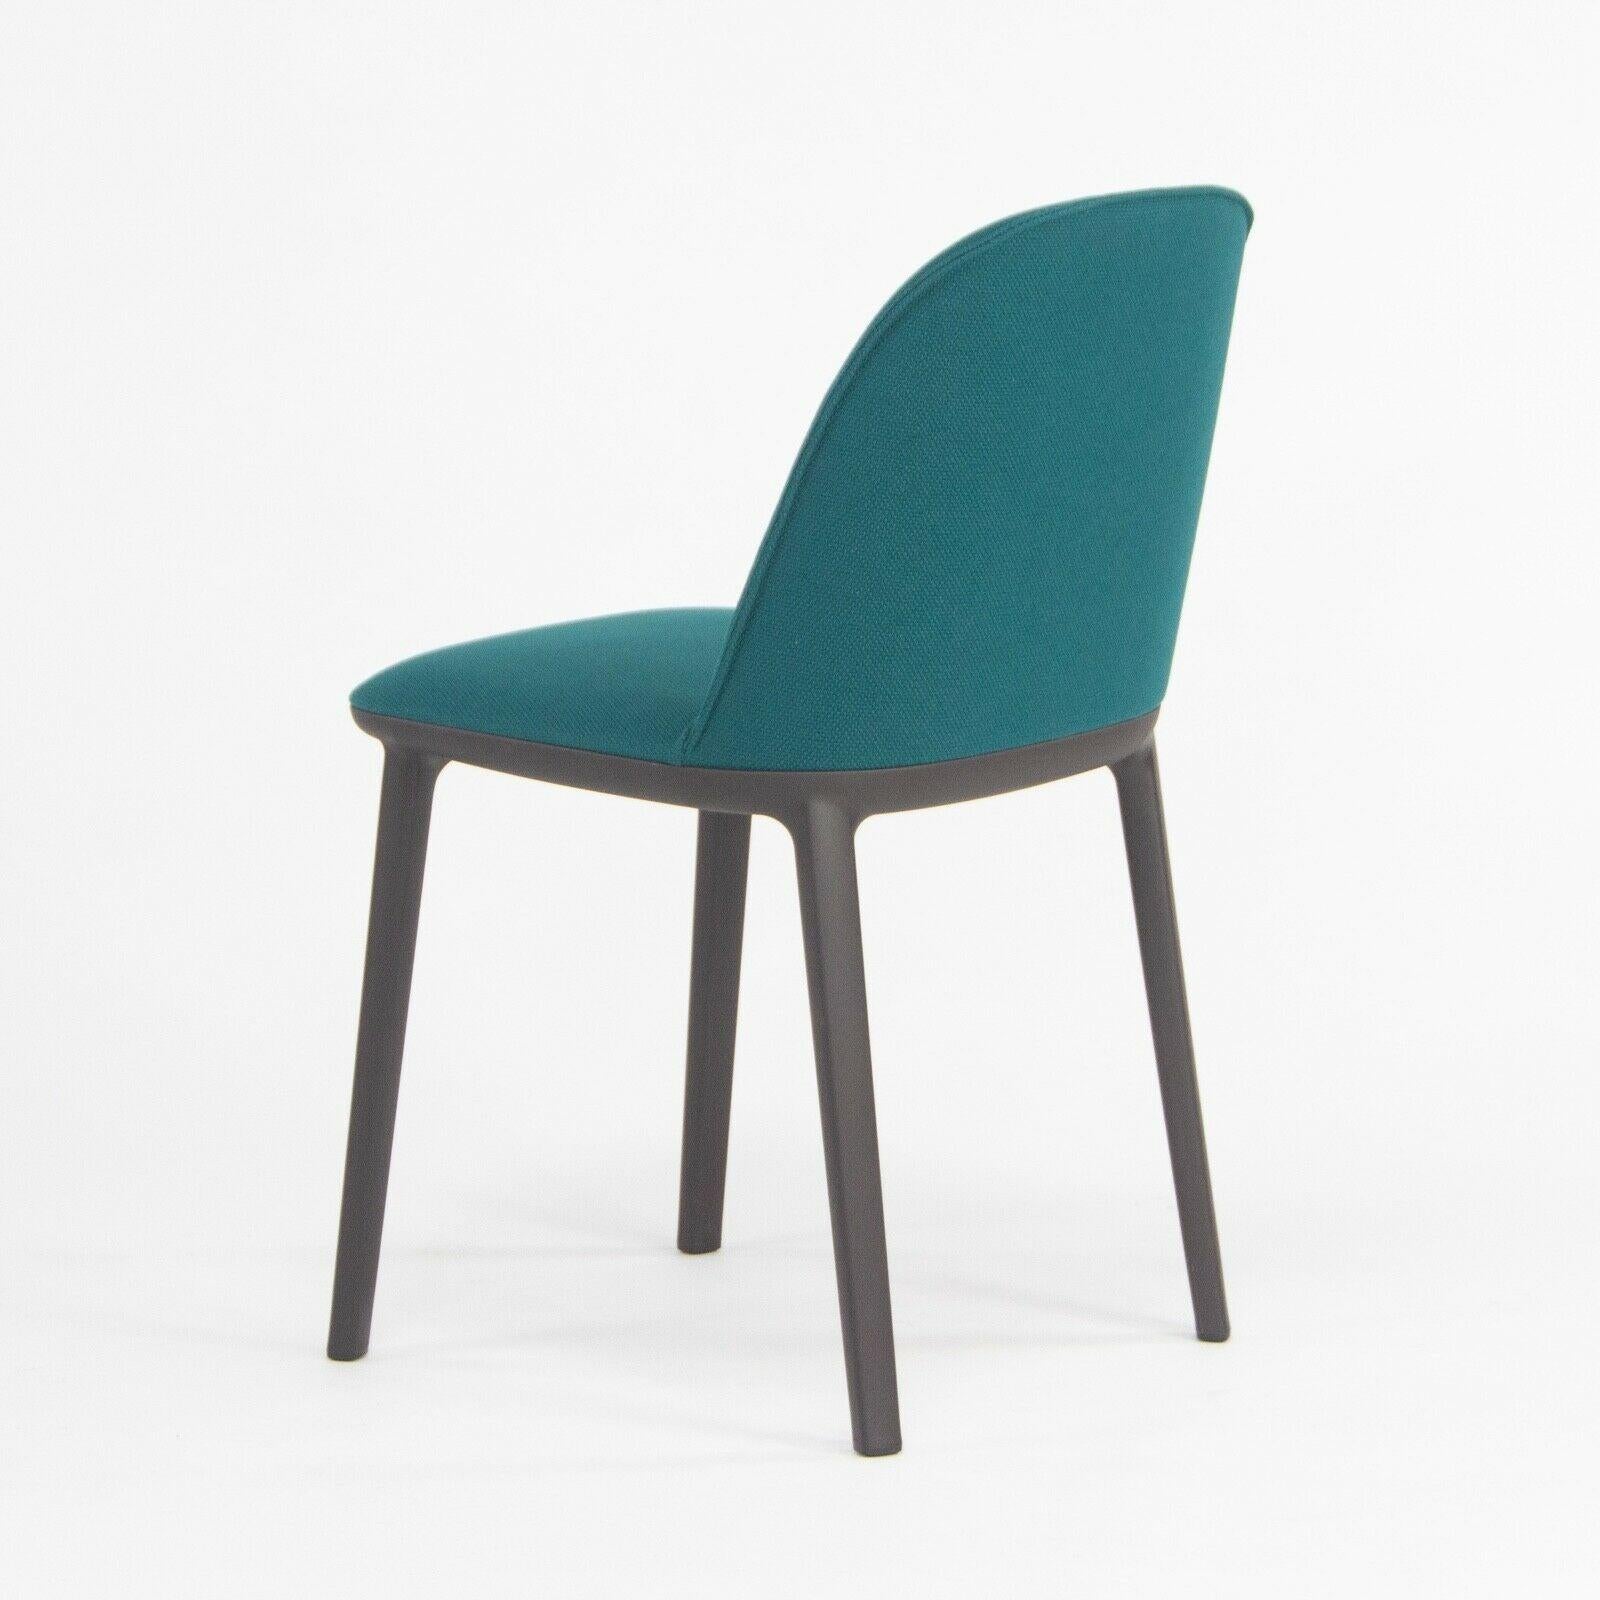 2019 Vitra Softshell Side Chair w/ Teal Blue Fabric by Ronan & Erwan Bouroullec In Good Condition For Sale In Philadelphia, PA